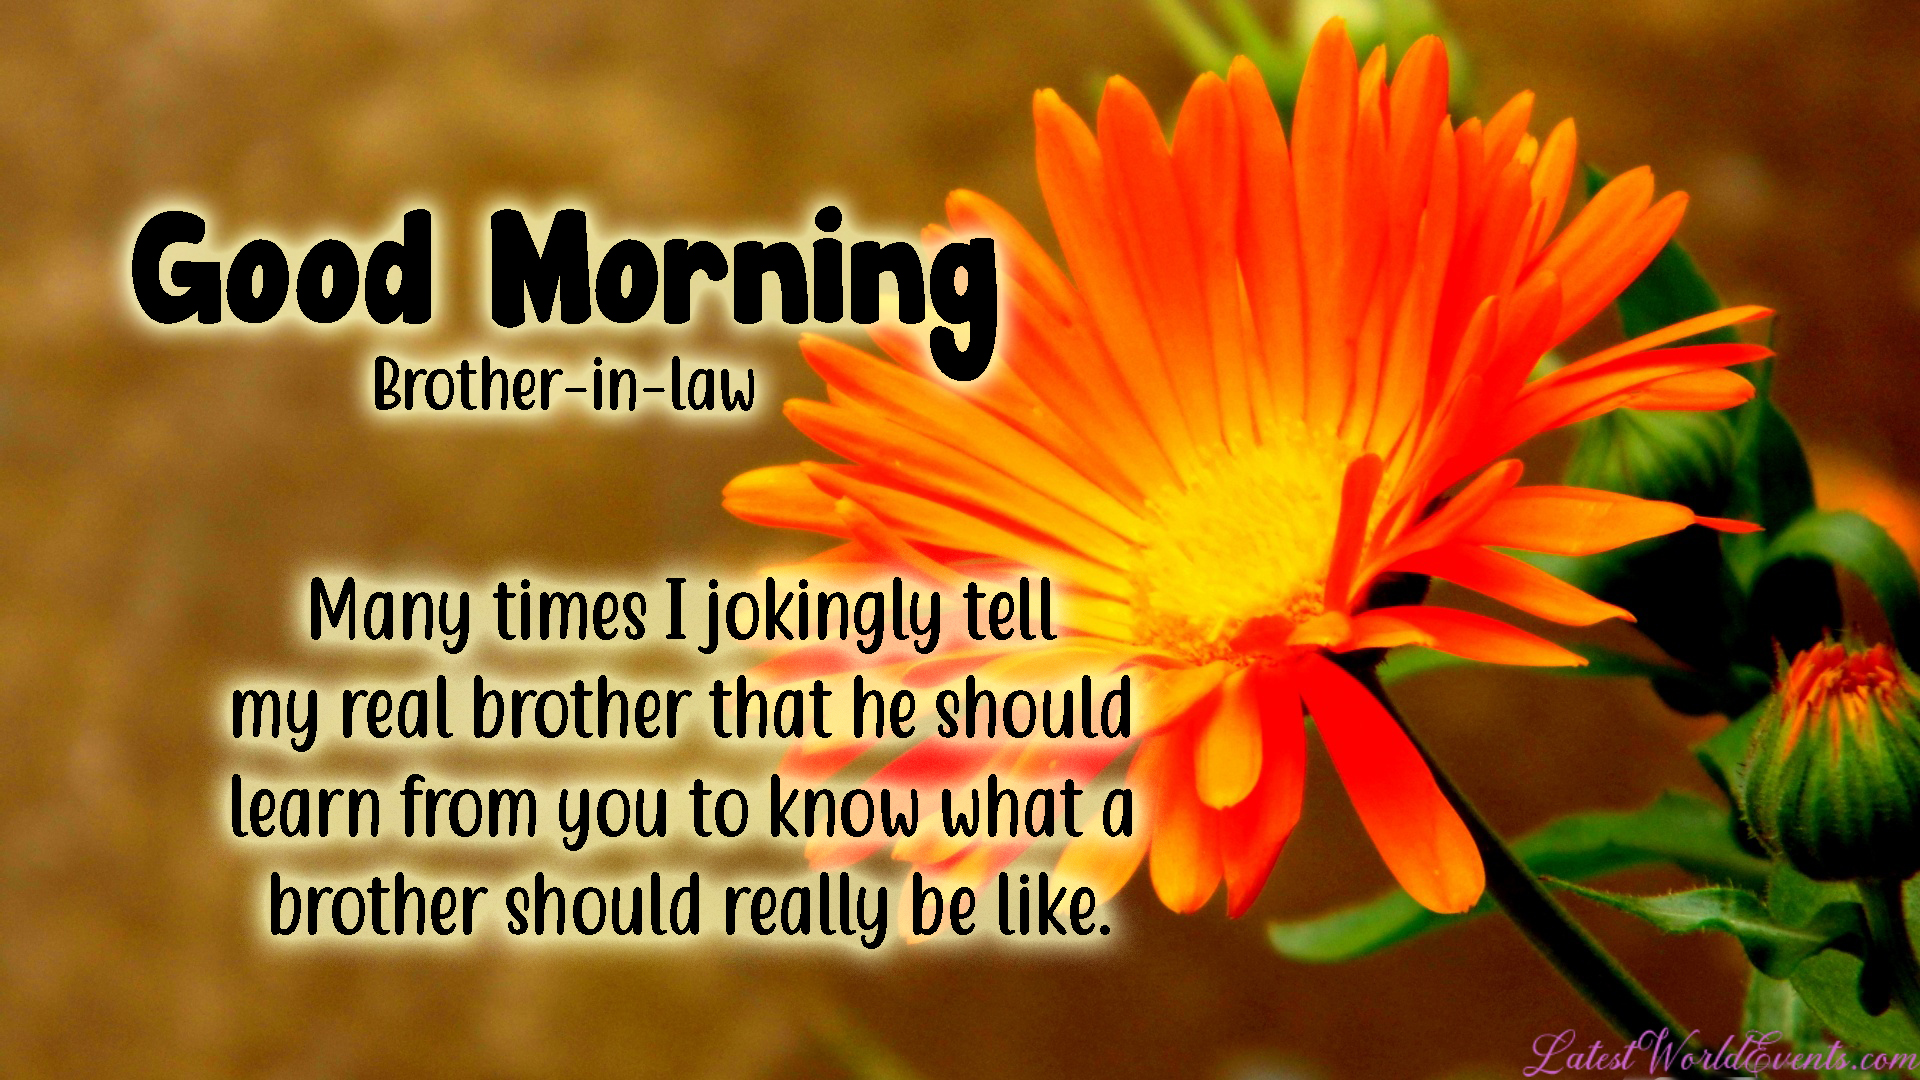 Good morning wishes for brother in law - Latest World Events